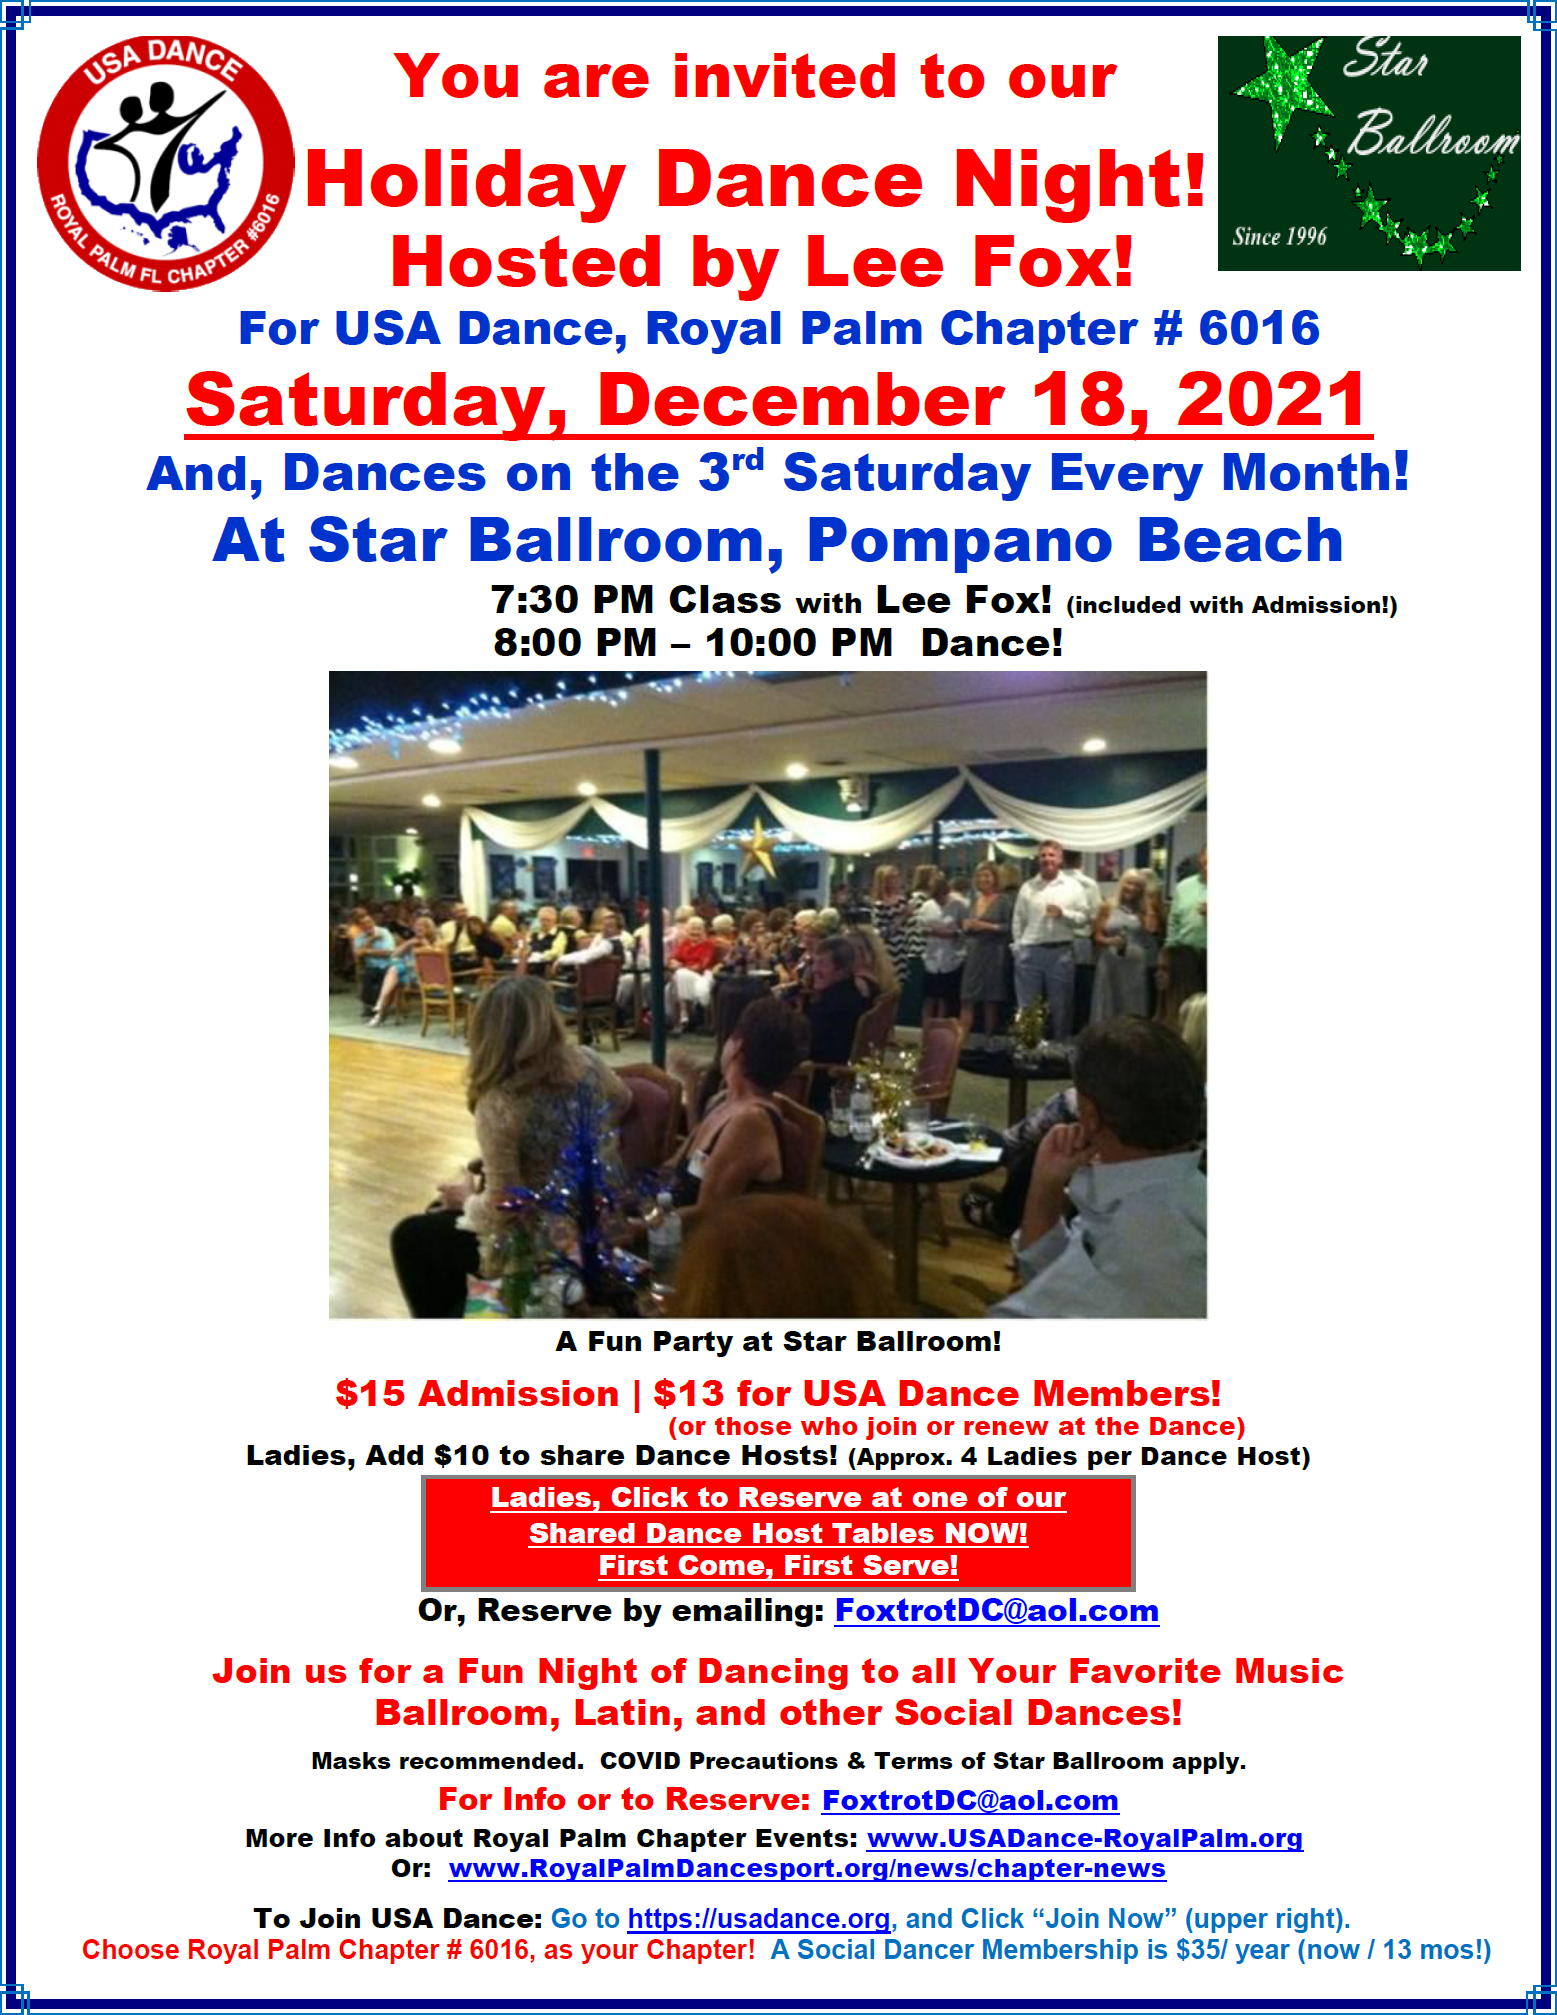 December 18, 2021 Holiday Dance Night - Hosted by Lee Fox for USA Dance Royal Palm Chapter - at Star Ballroom